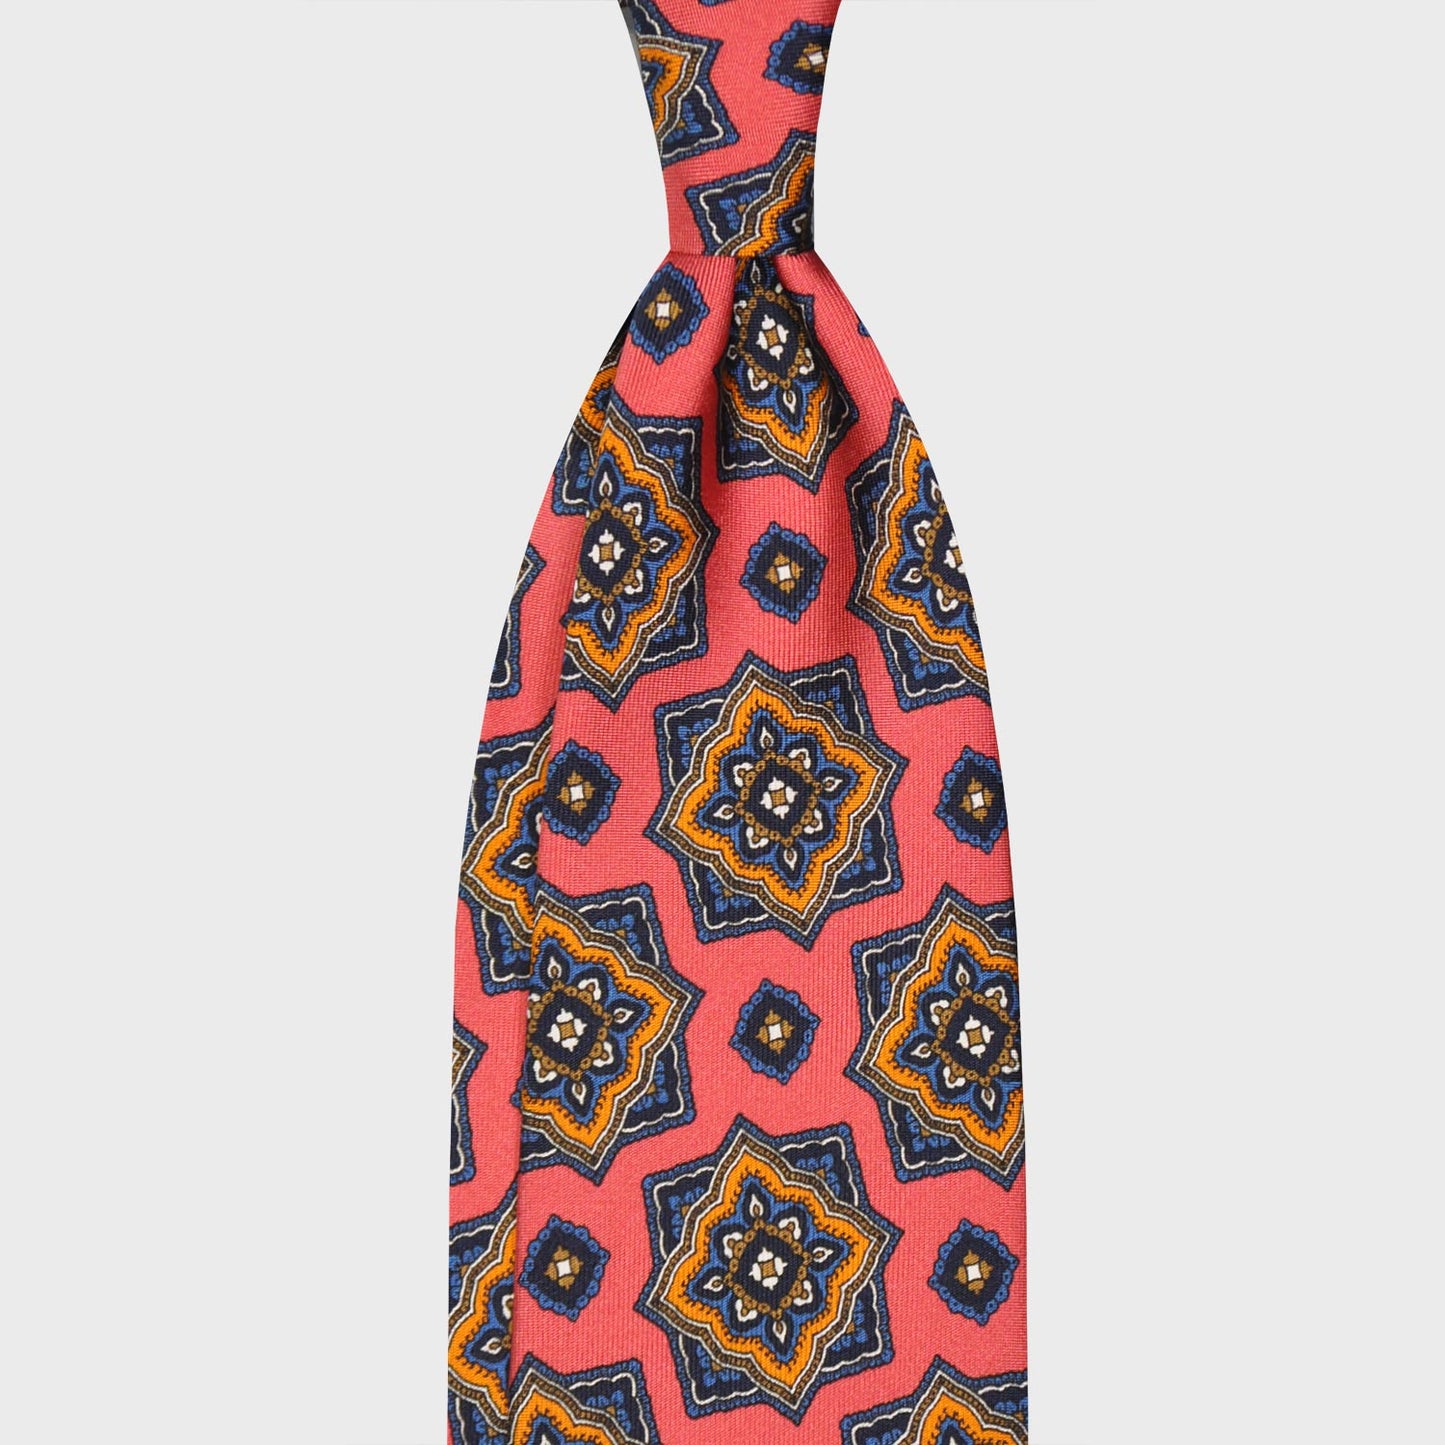 Mandala Pattern Salmon Pink Silk Tie Unlined. Refined mandala pattern salmon pink silk tie, pervinca blue and curry yellow mandala medallions pattern, unlined 3 folds, handmade tie F.Marino Napoli for Wools Boutique Uomo